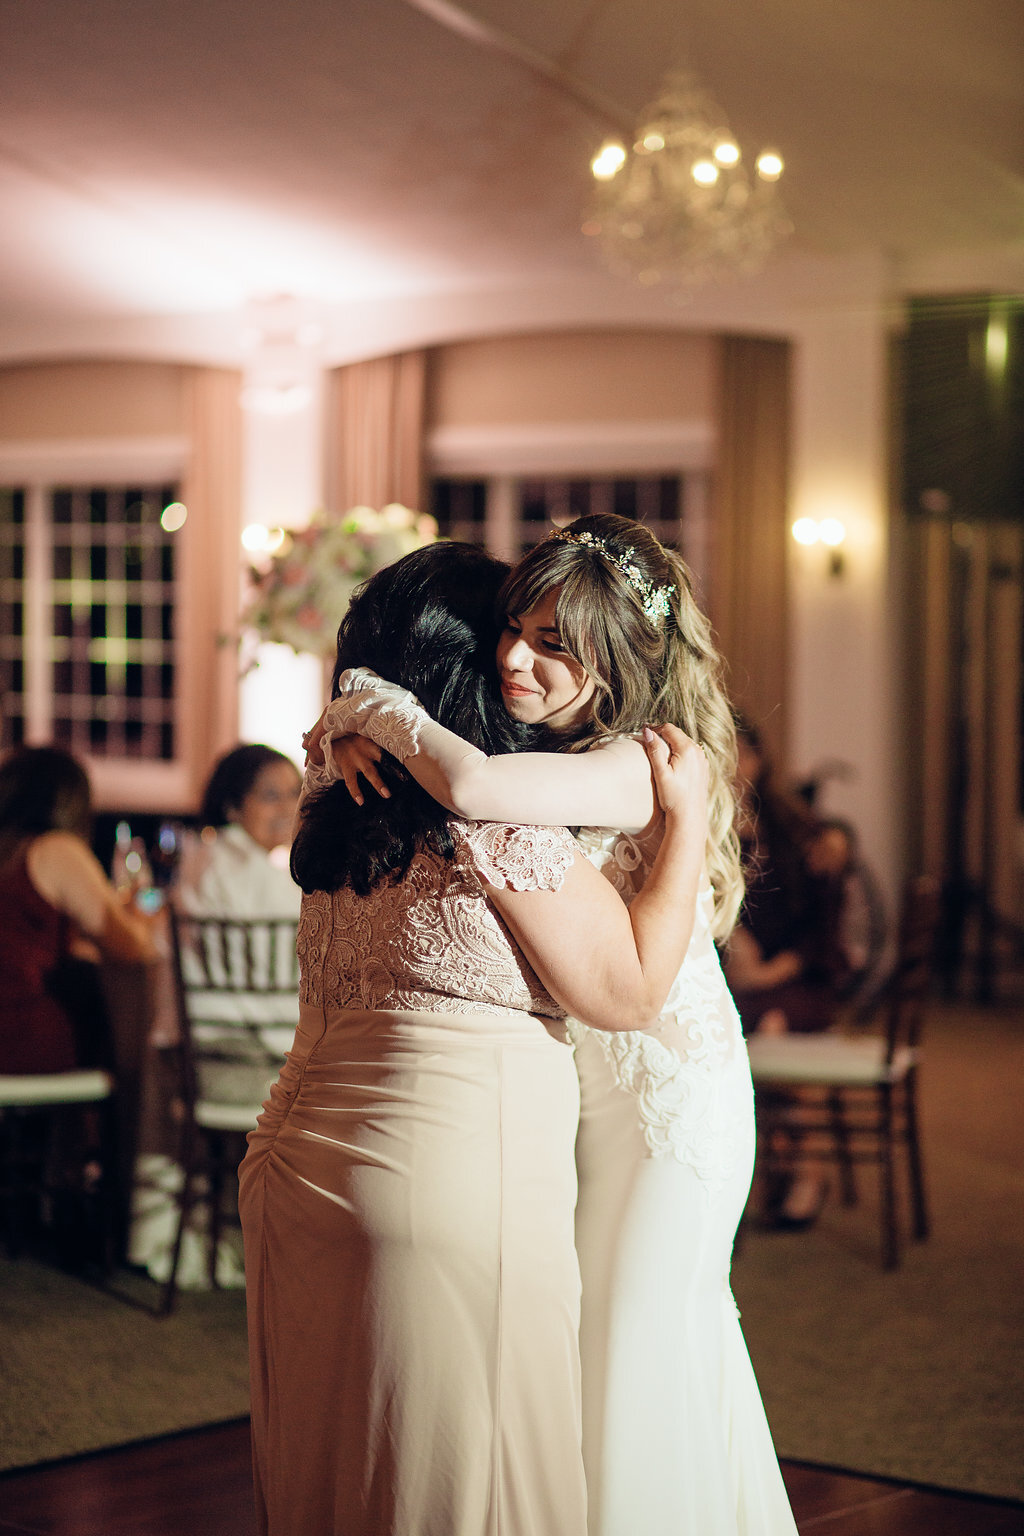 Wedding Photograph Of Bride Smiling While Hugging A Woman In Light Brown Dress Los Angeles